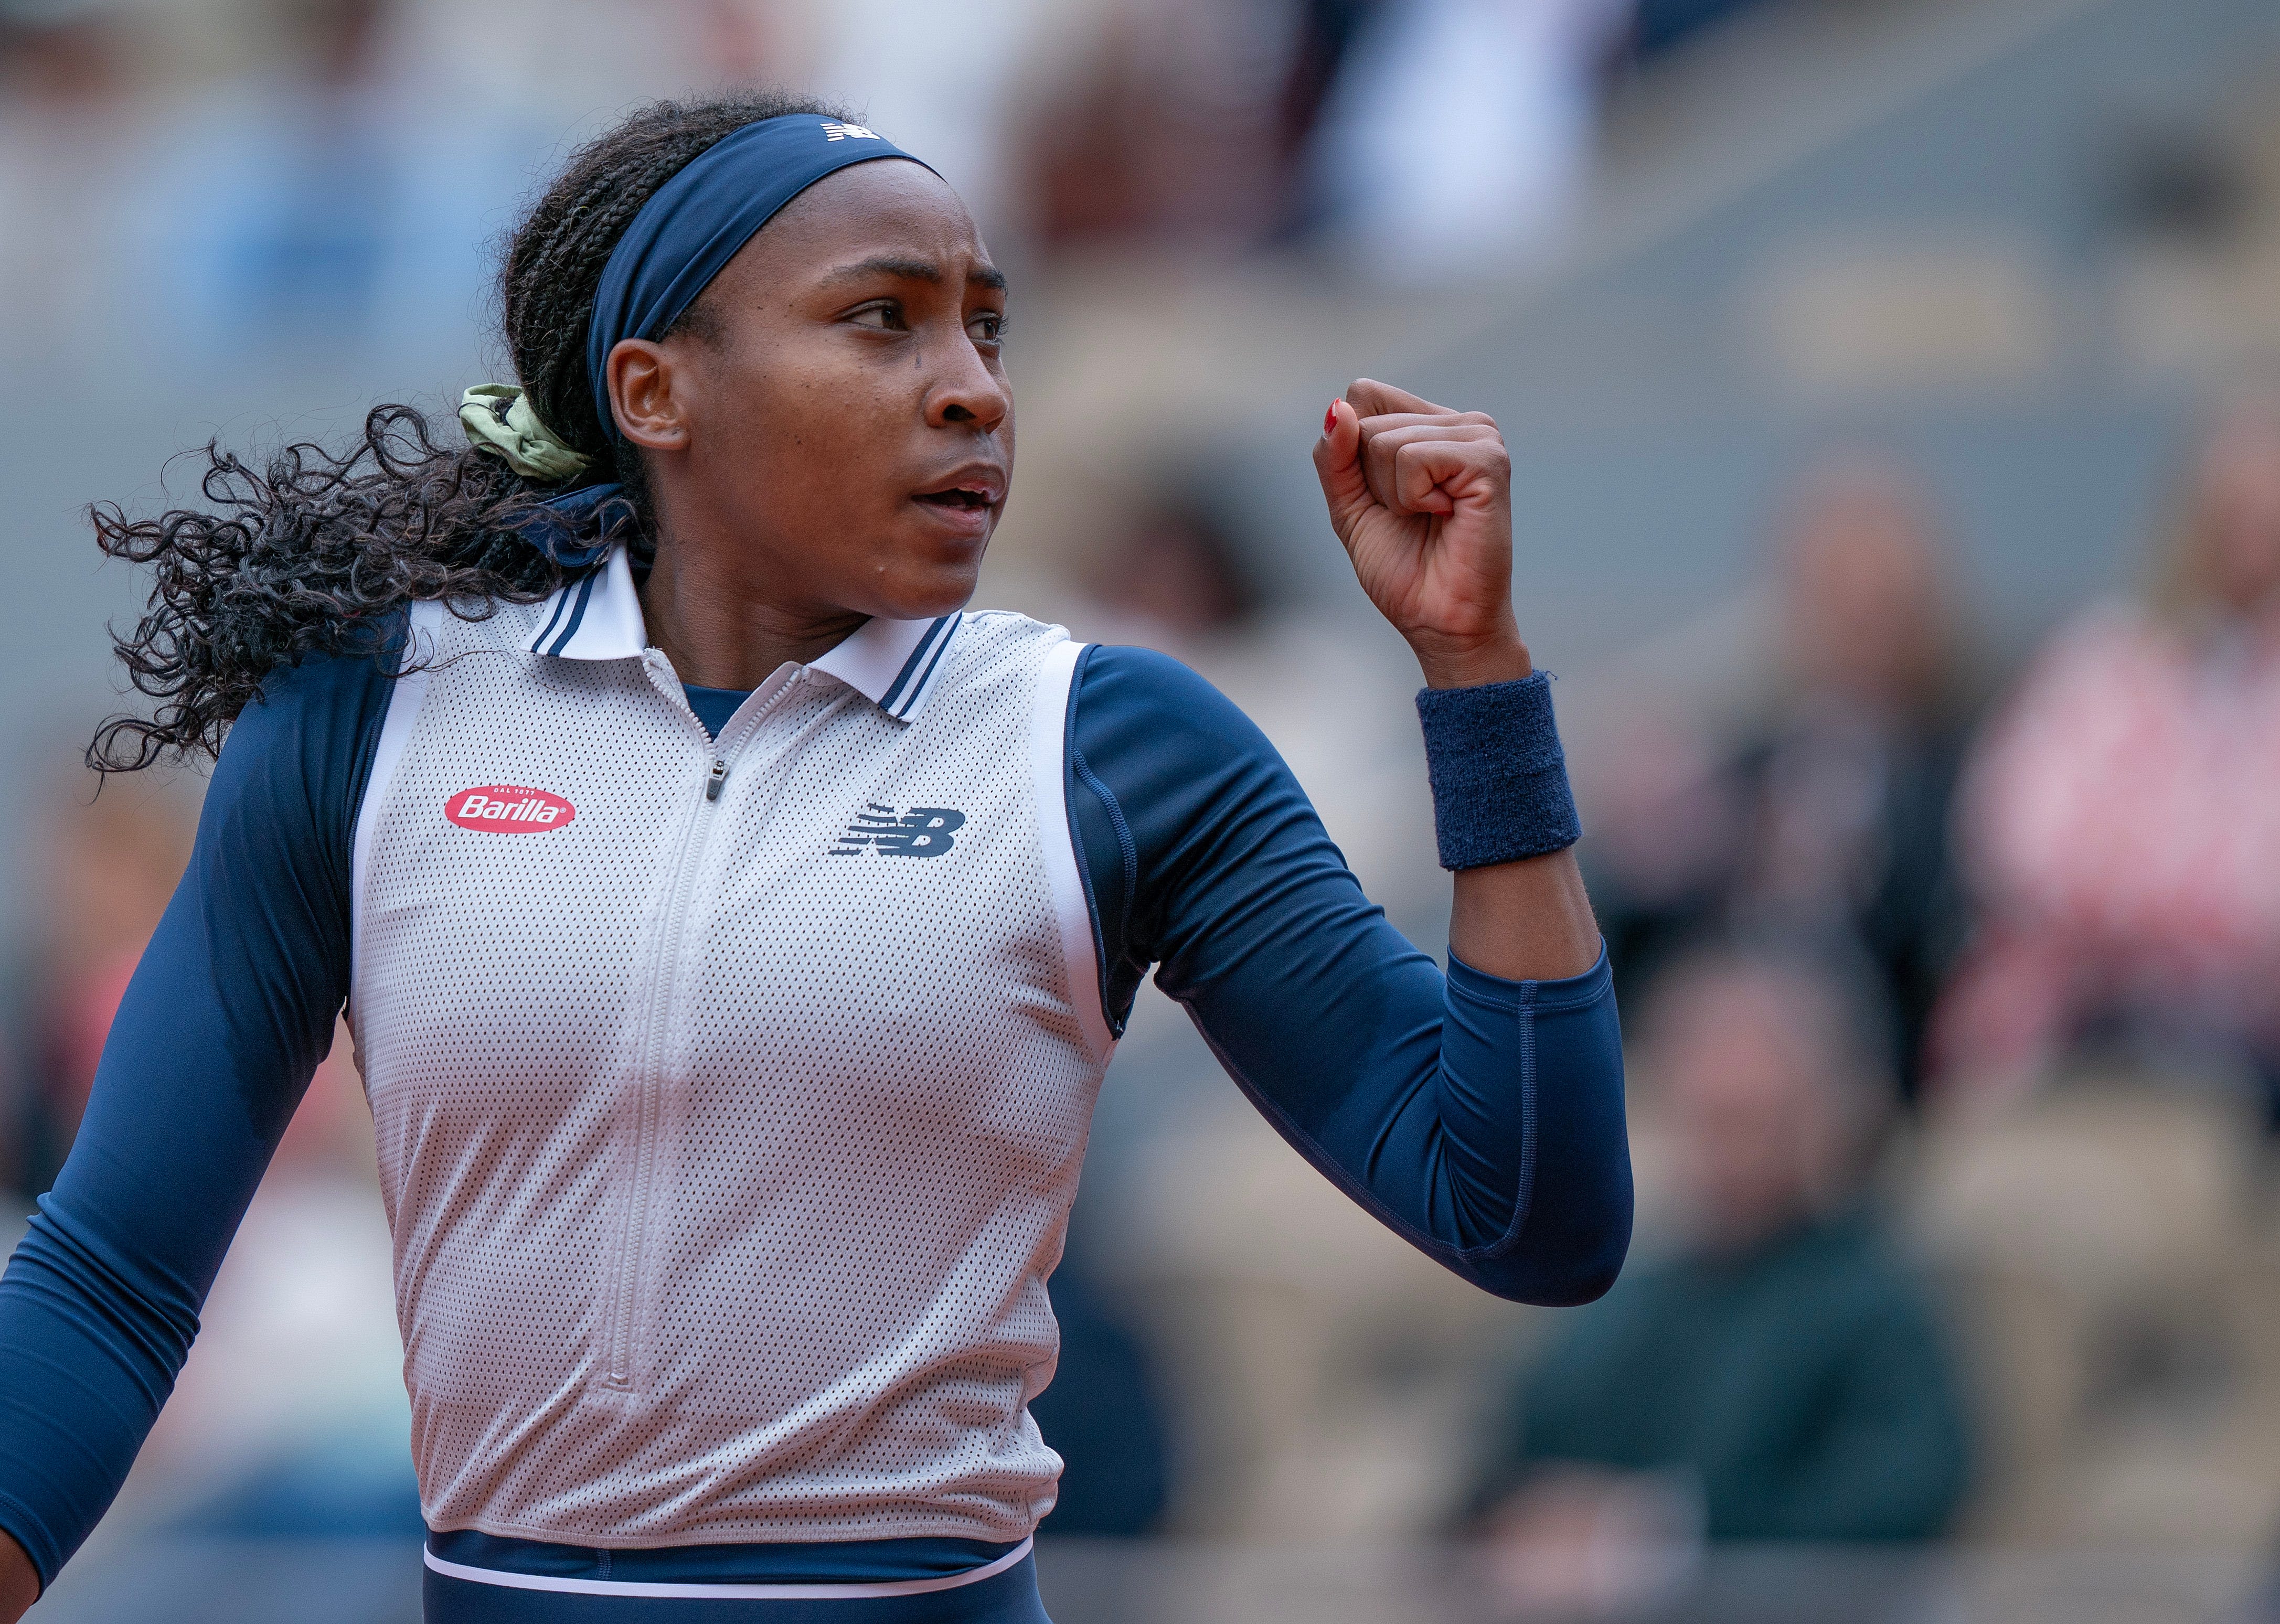 Coco Gauff says late finishes for tennis matches are 'not healthy' for players